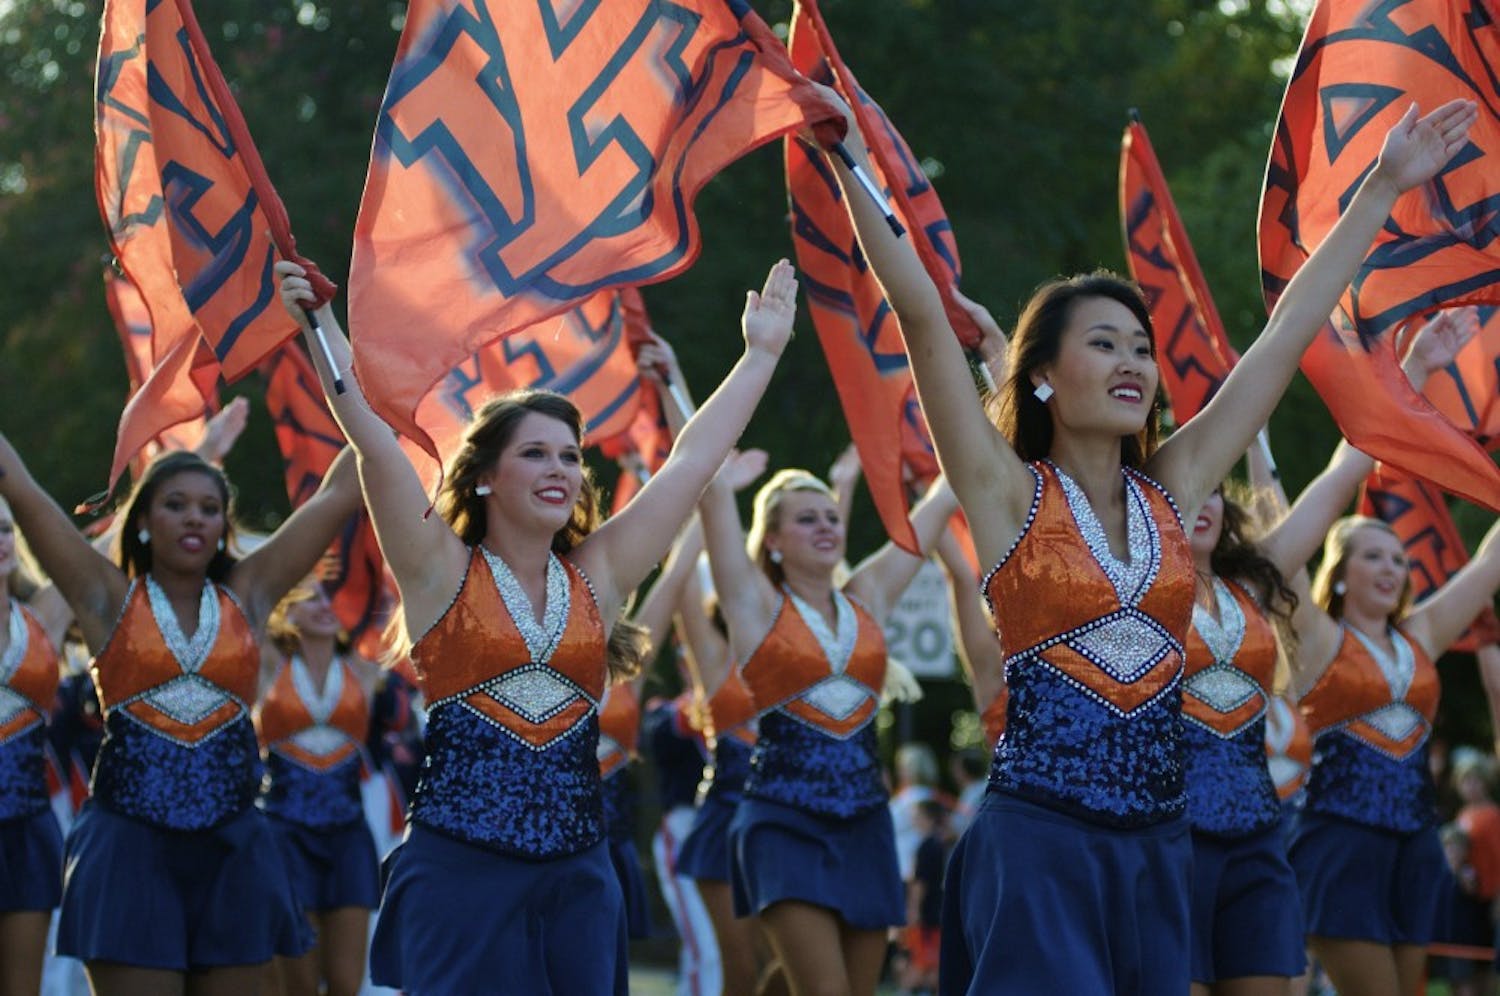 Auburn University Marching Band performs during the Homecoming Parade on Friday, Sept. 15, 2017 in Auburn, Ala.